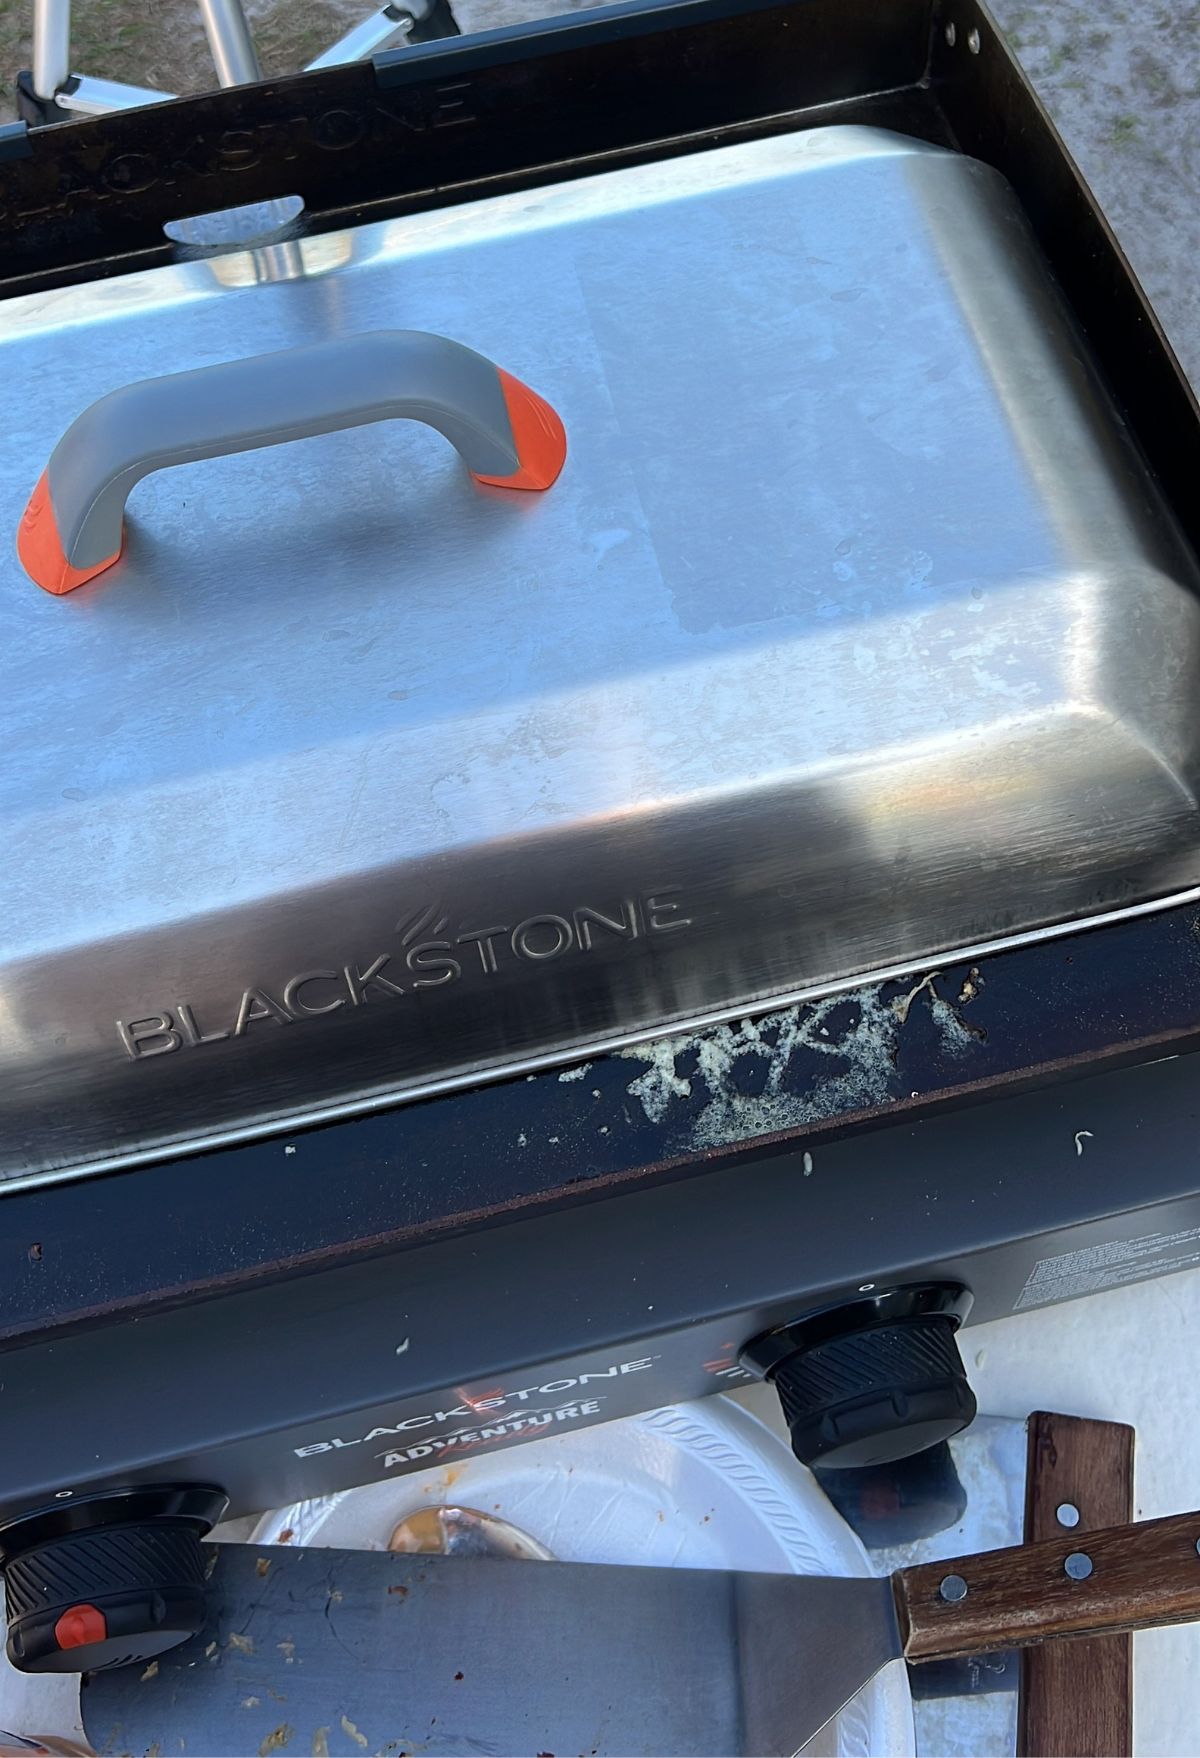 A blackstone grill with a knife on top of it.